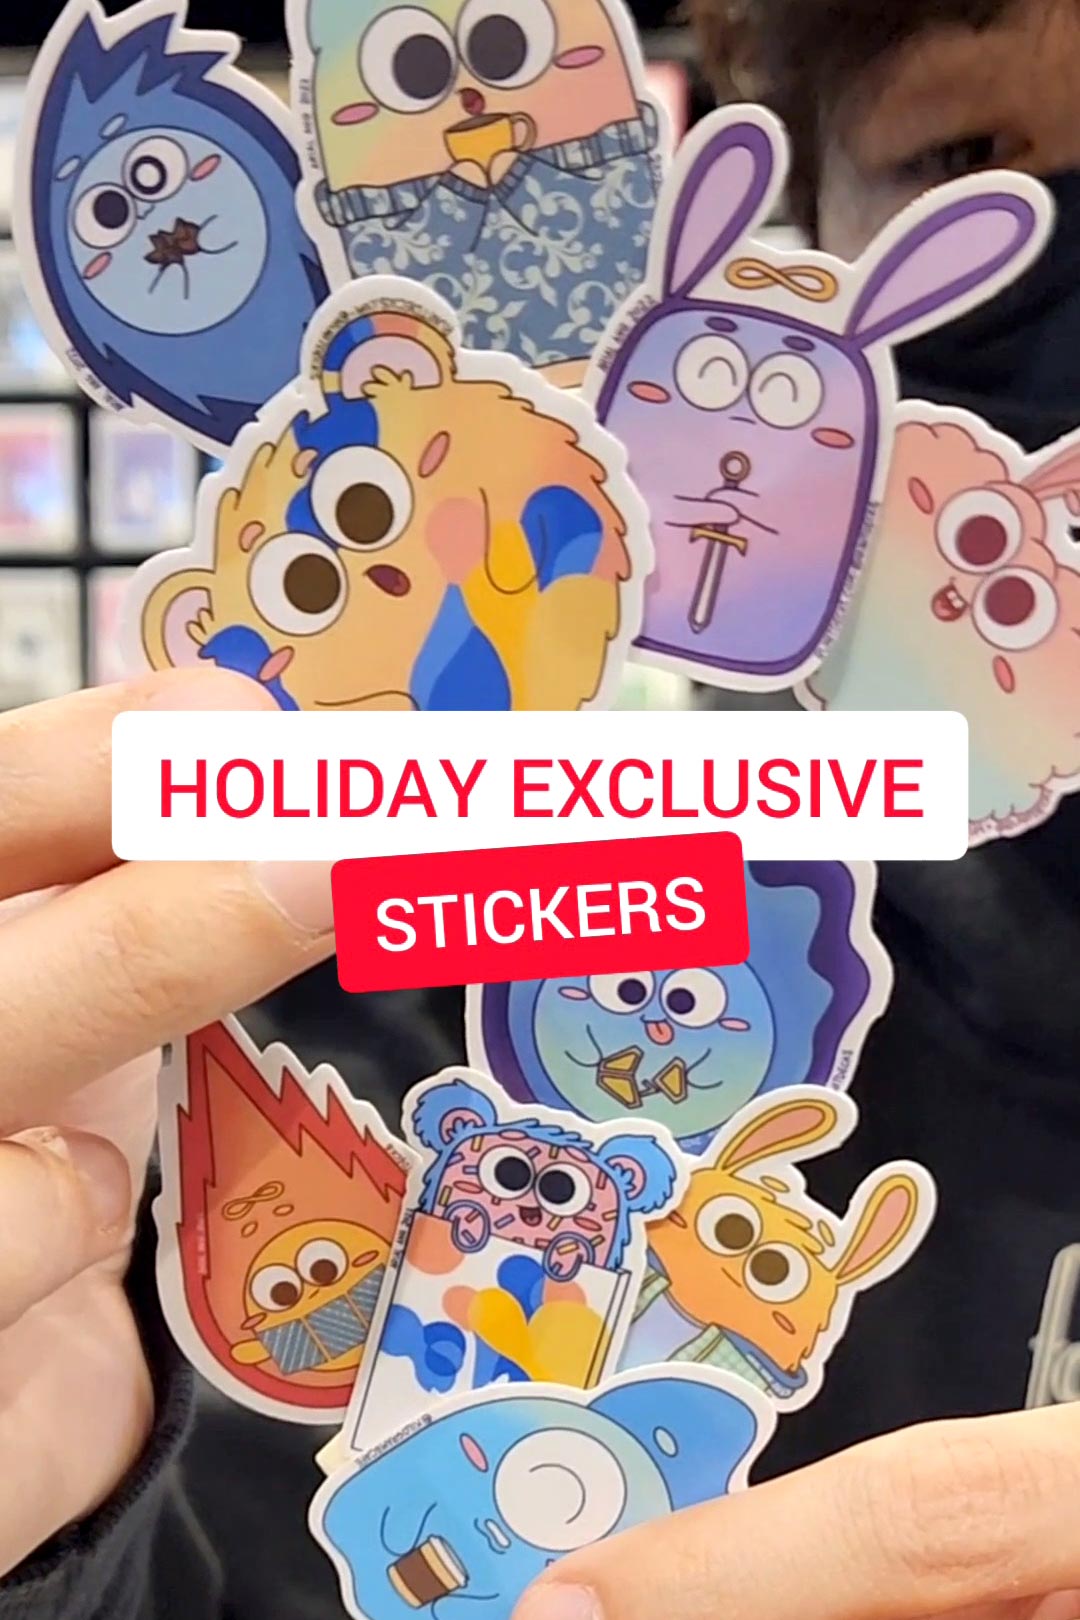 Holiday Exclusive Stickers!